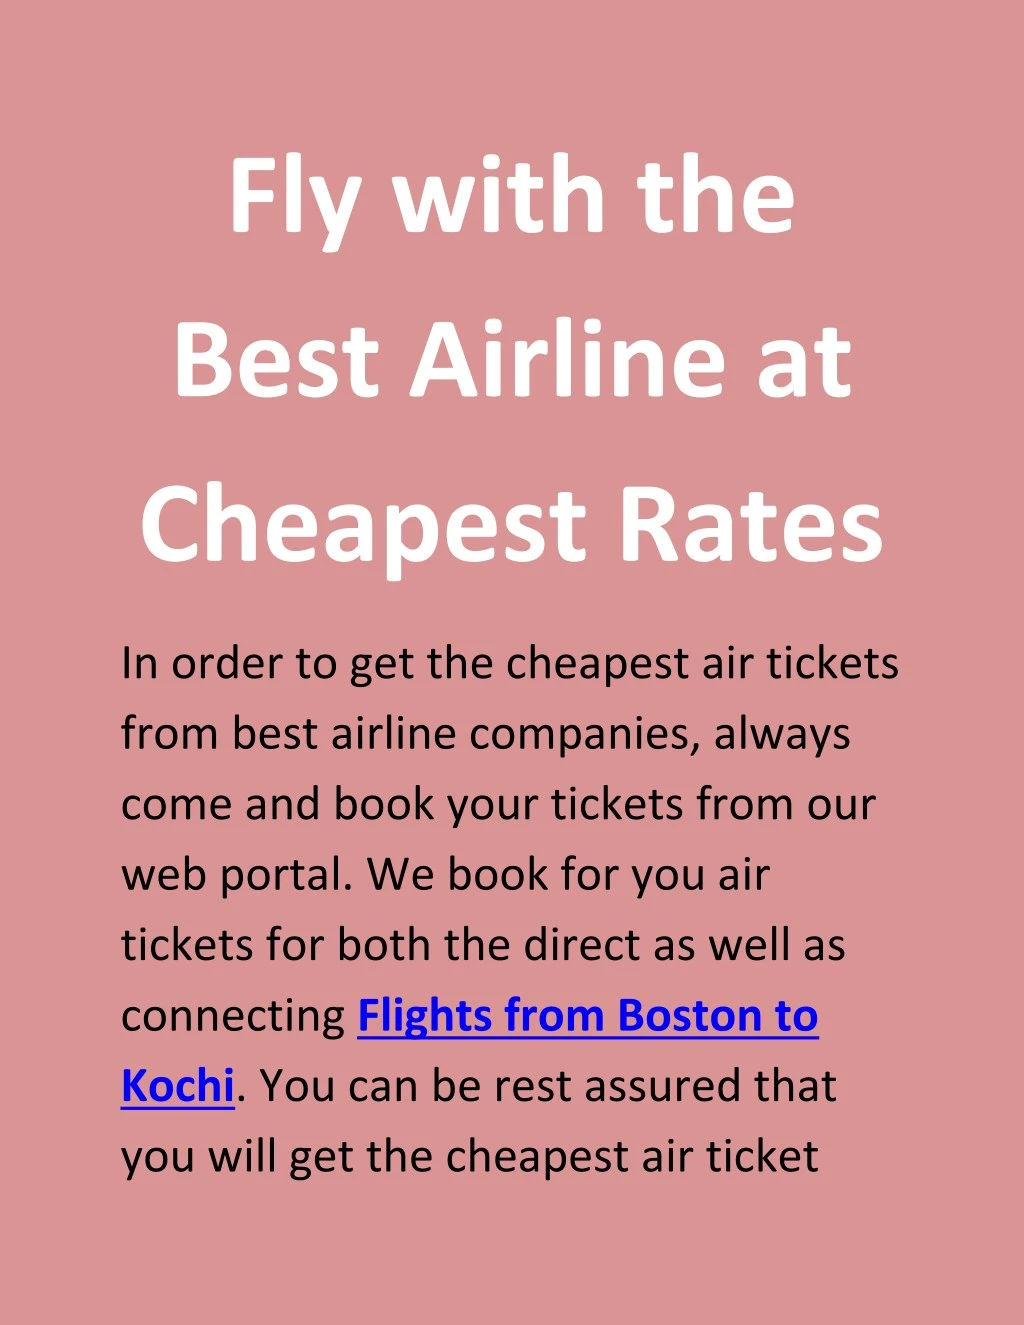 fly with the best airline at cheapest rates